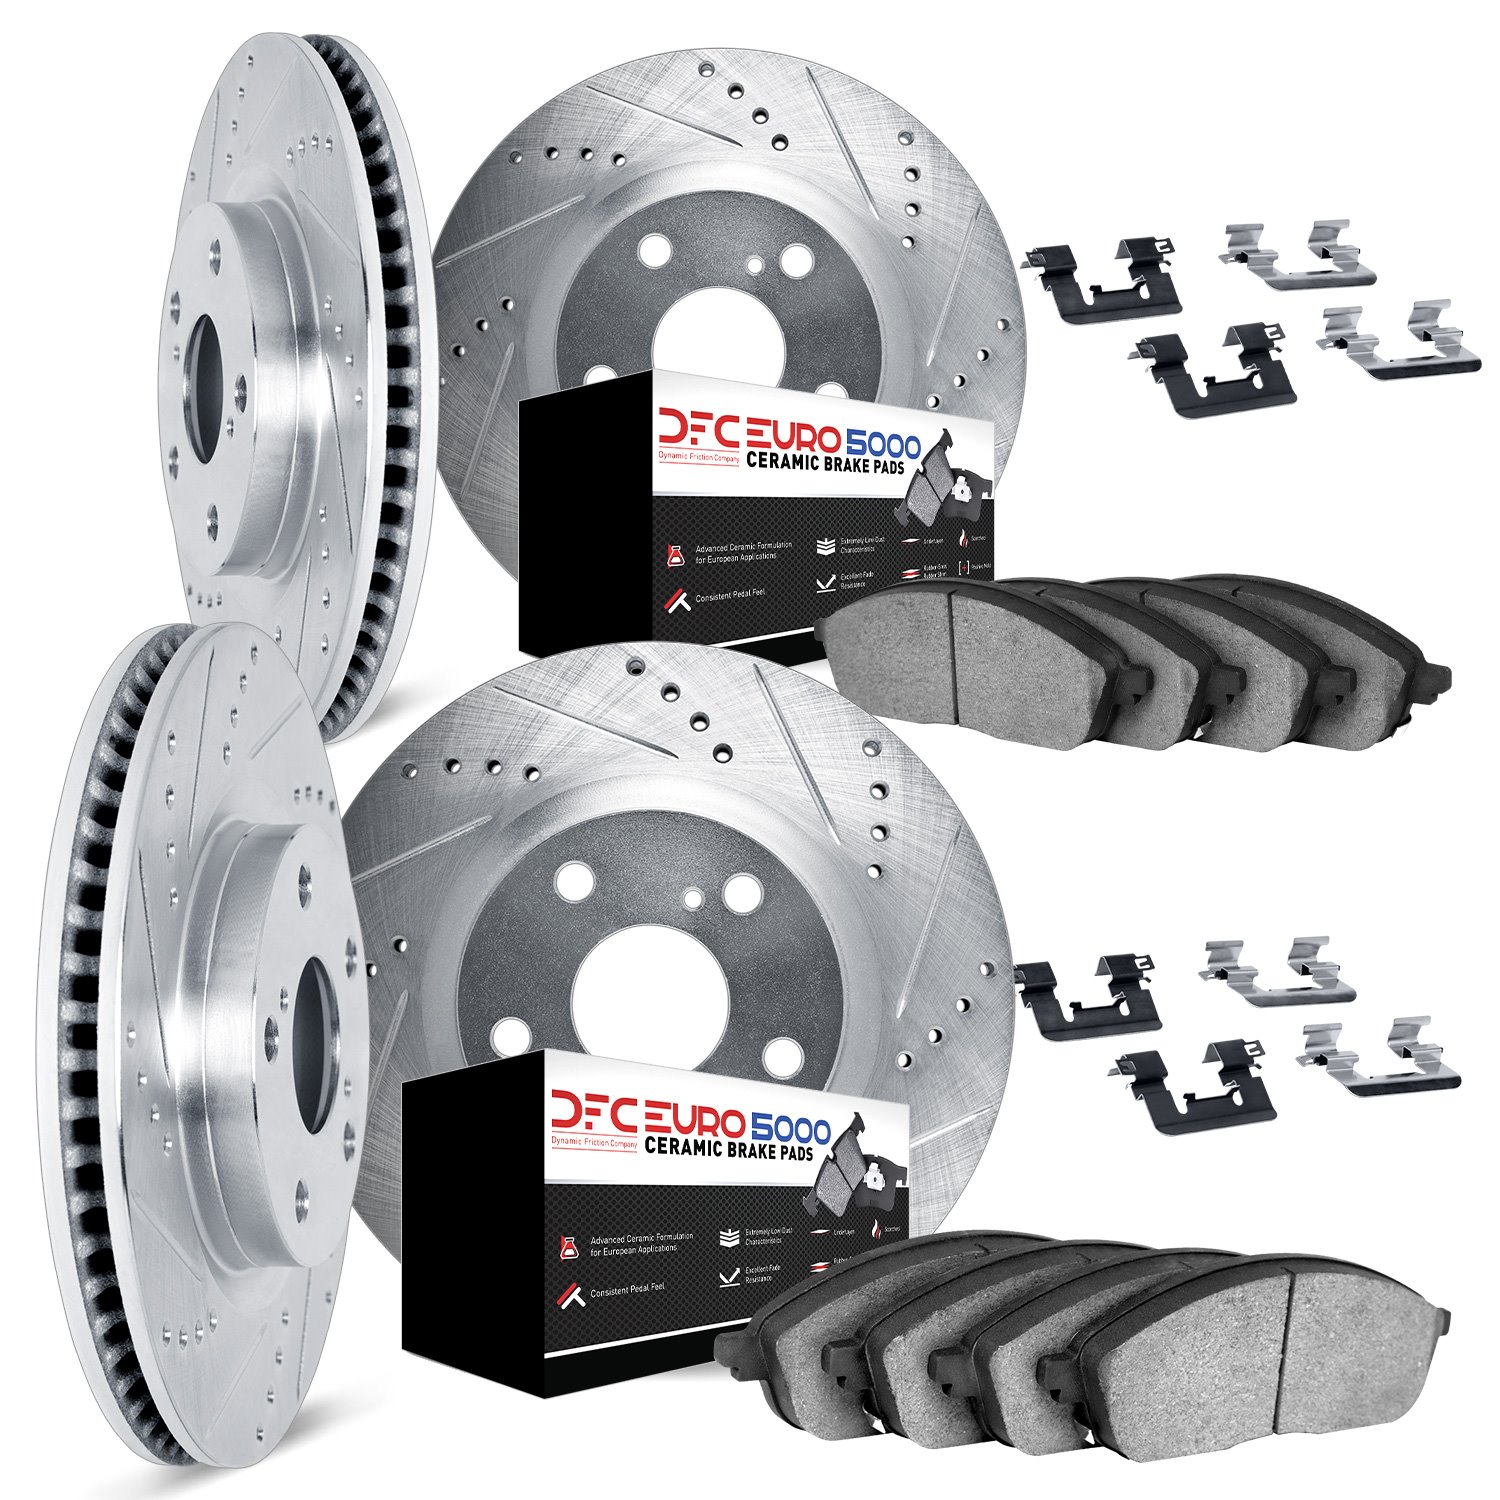 7614-31026 Drilled/Slotted Brake Rotors w/5000 Euro Ceramic Brake Pads Kit & Hardware [Silver], 2012-2021 BMW, Position: Front a